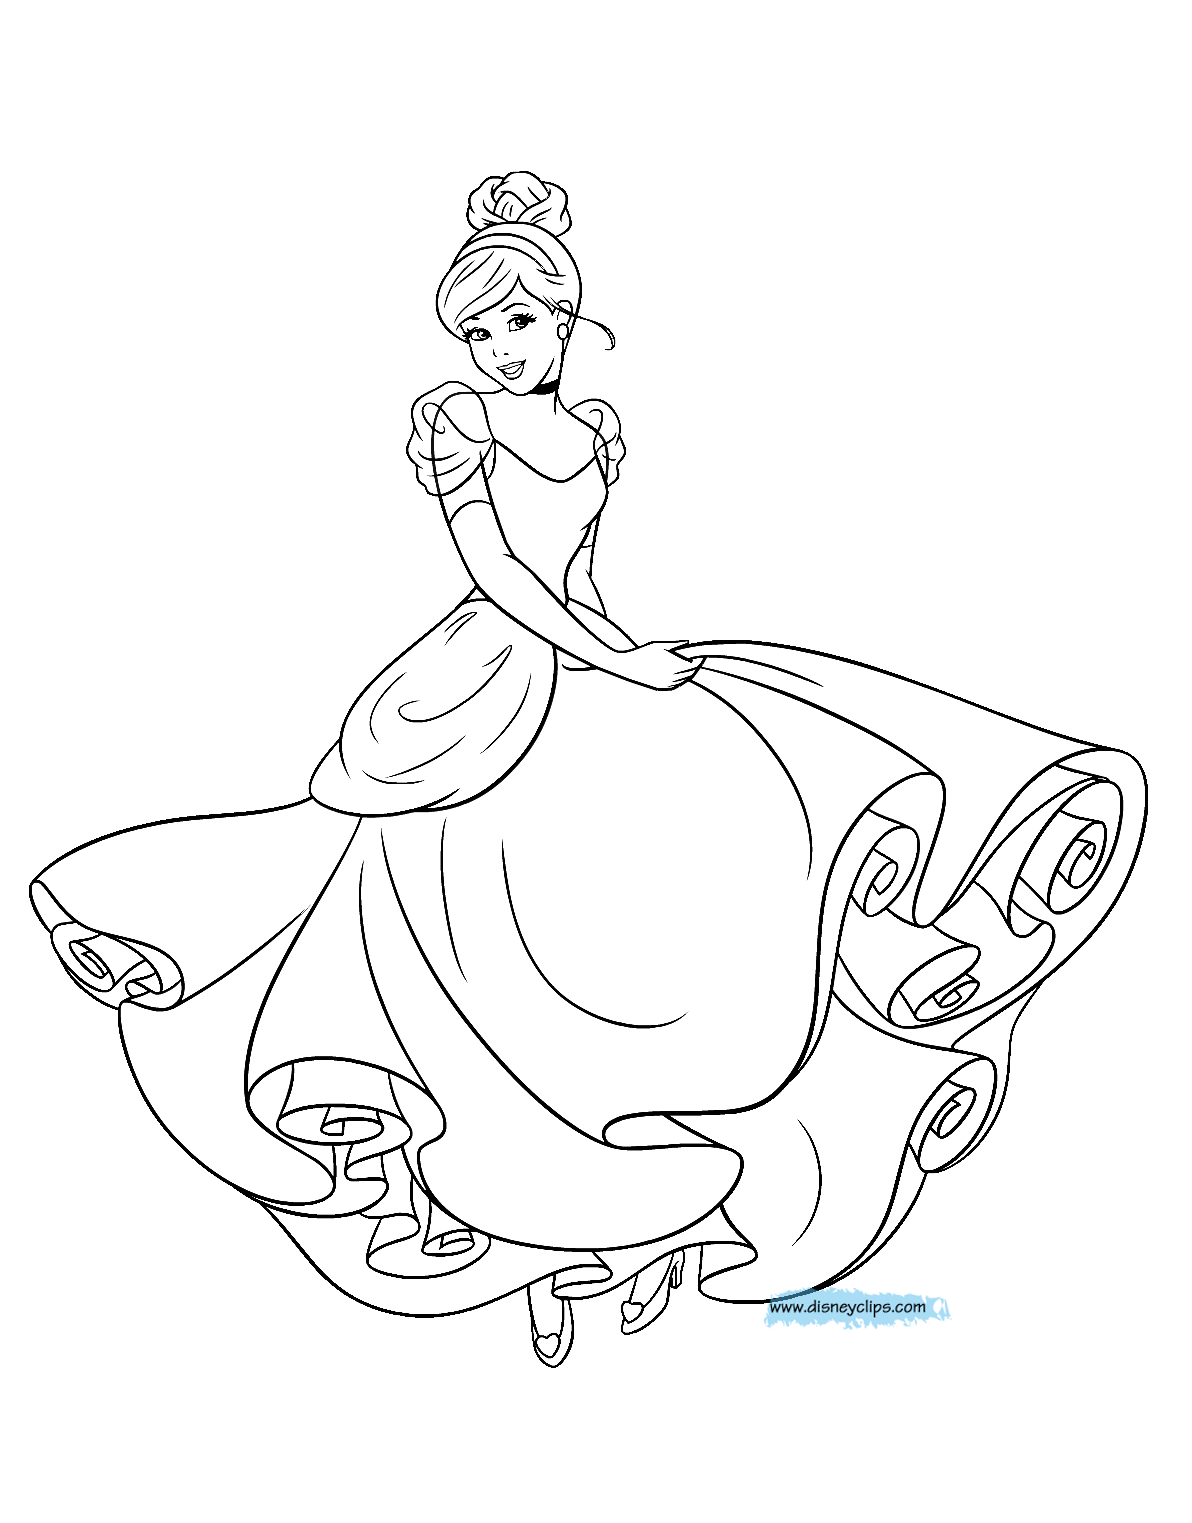 cinderella colouring pages free disney39s cinderella coloring pages disneyclipscom free pages cinderella colouring 1 1